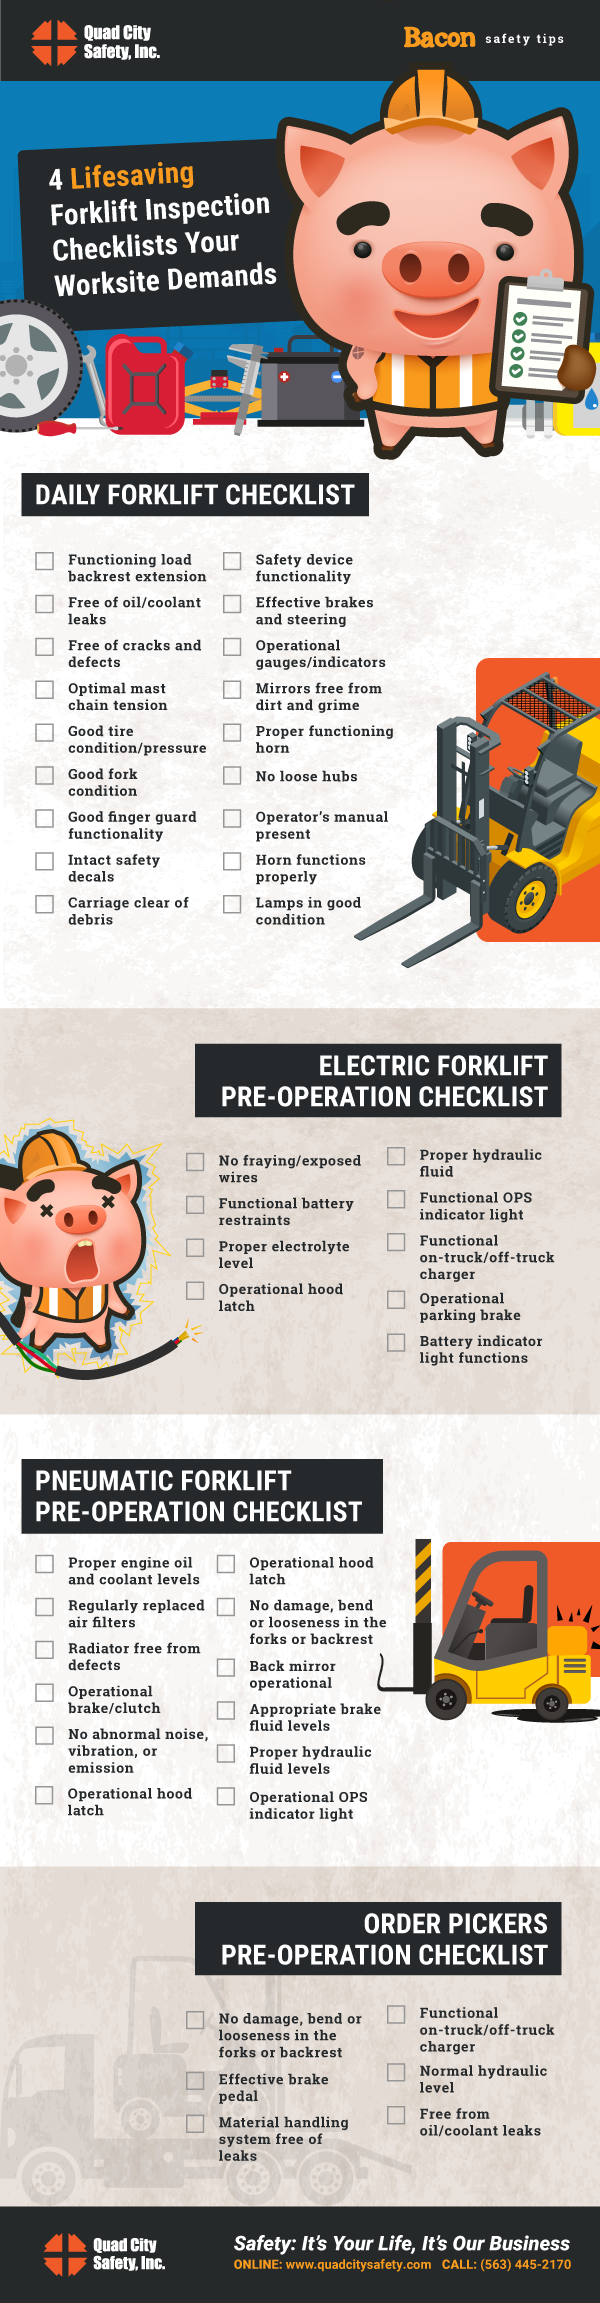 Bacon's-Safety-Tips---C05---Forklift